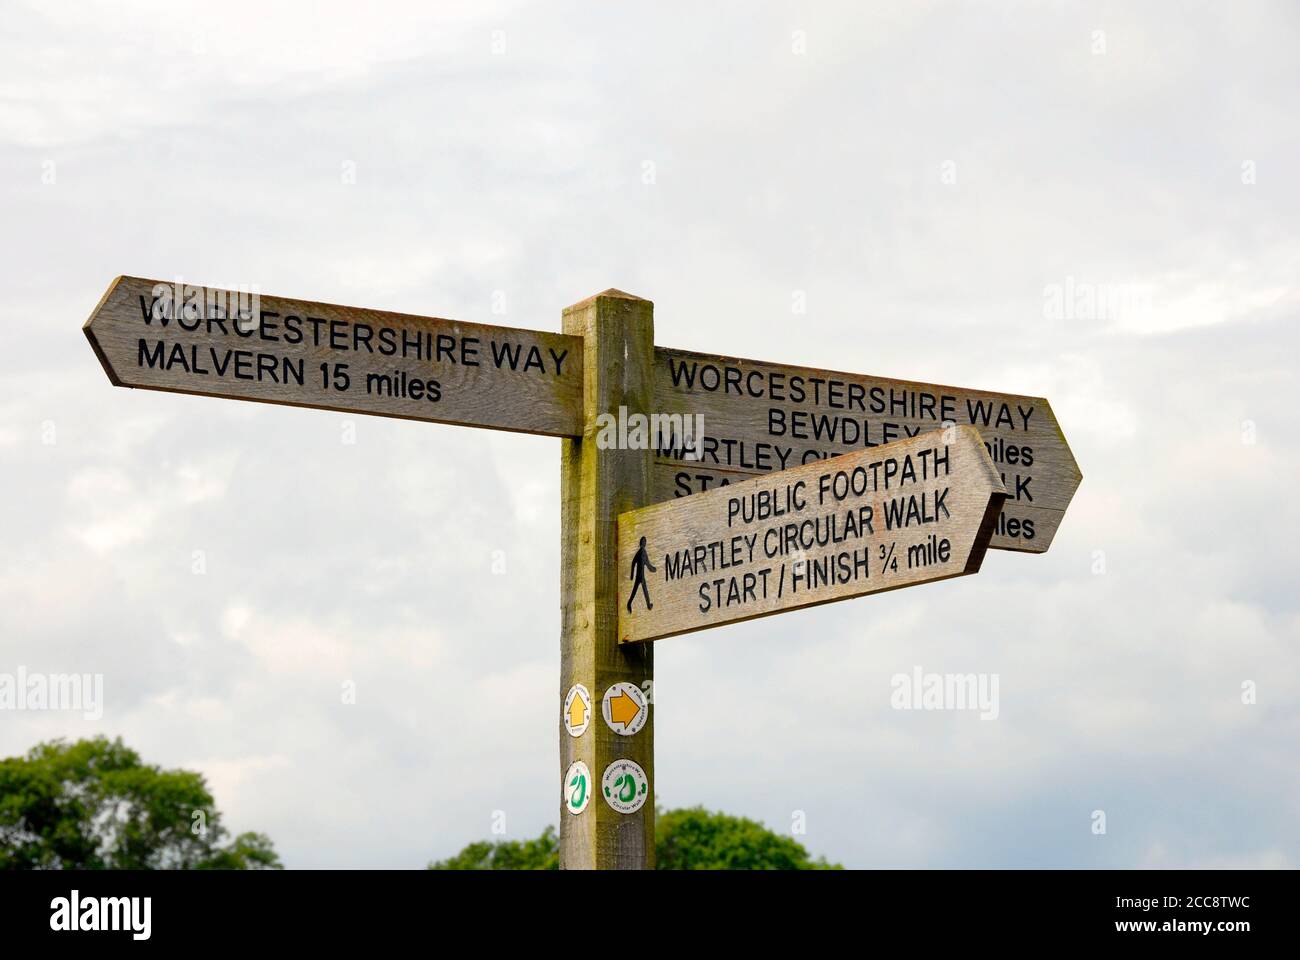 Signpost in the English countryside, with directions and distances to various nearby locations, Wocestershire, England Stock Photo